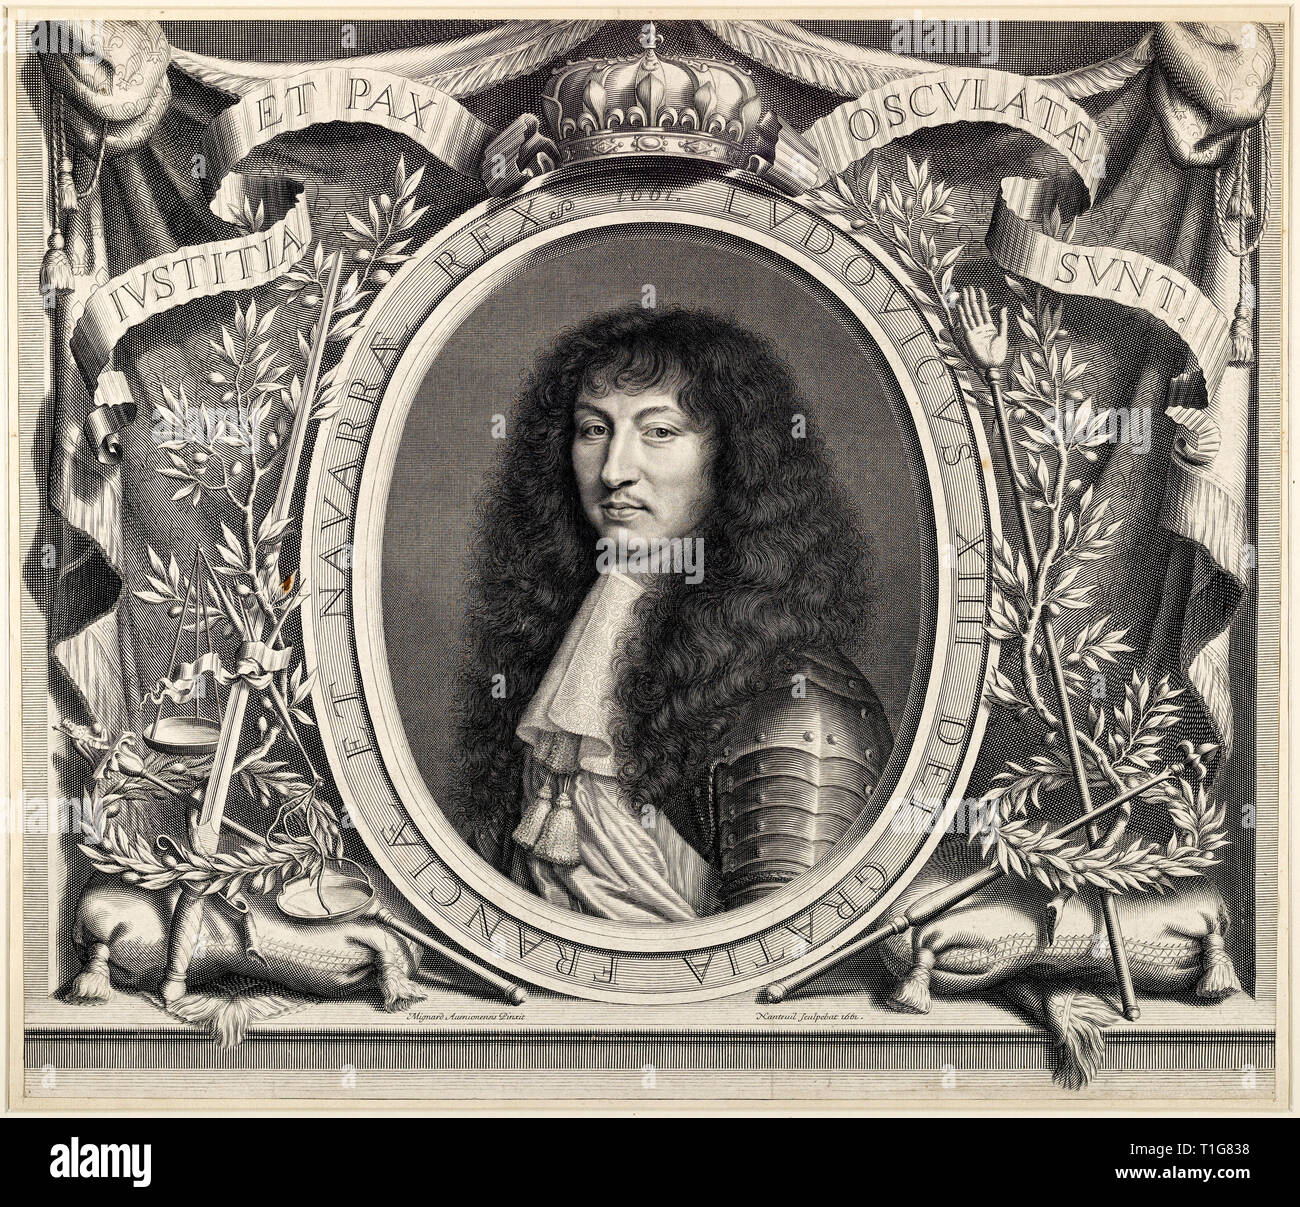 Louis XIV of France (1638-1715), portrait engraving by Robert Nanteuil, 1661 Stock Photo